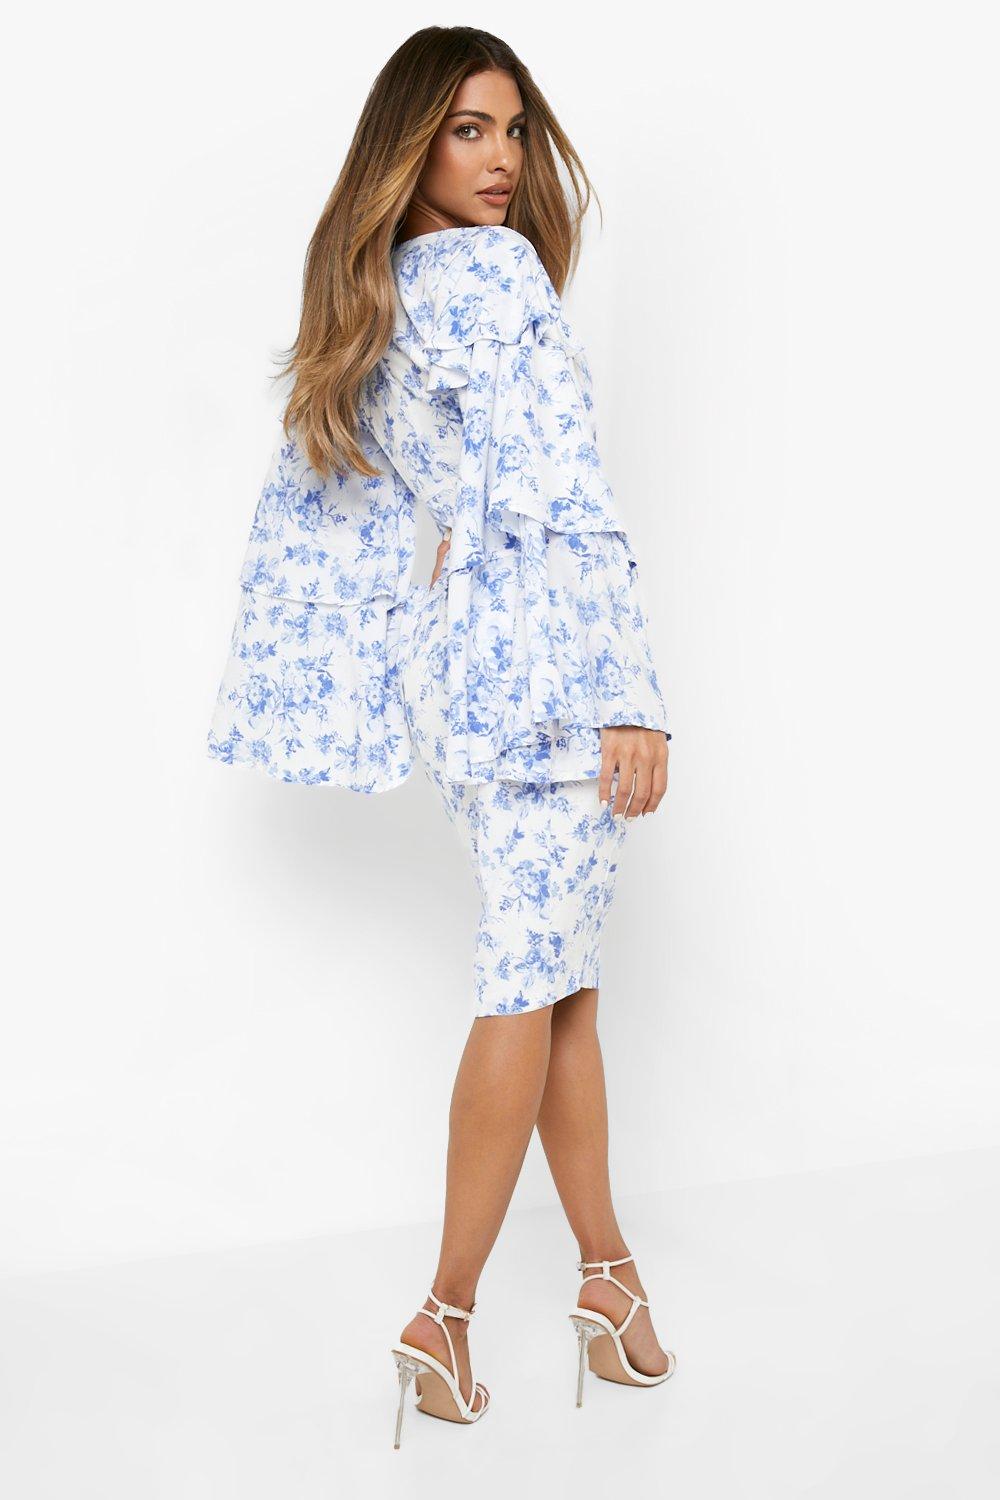 Midi dress with bell sleeves - Buy and Slay